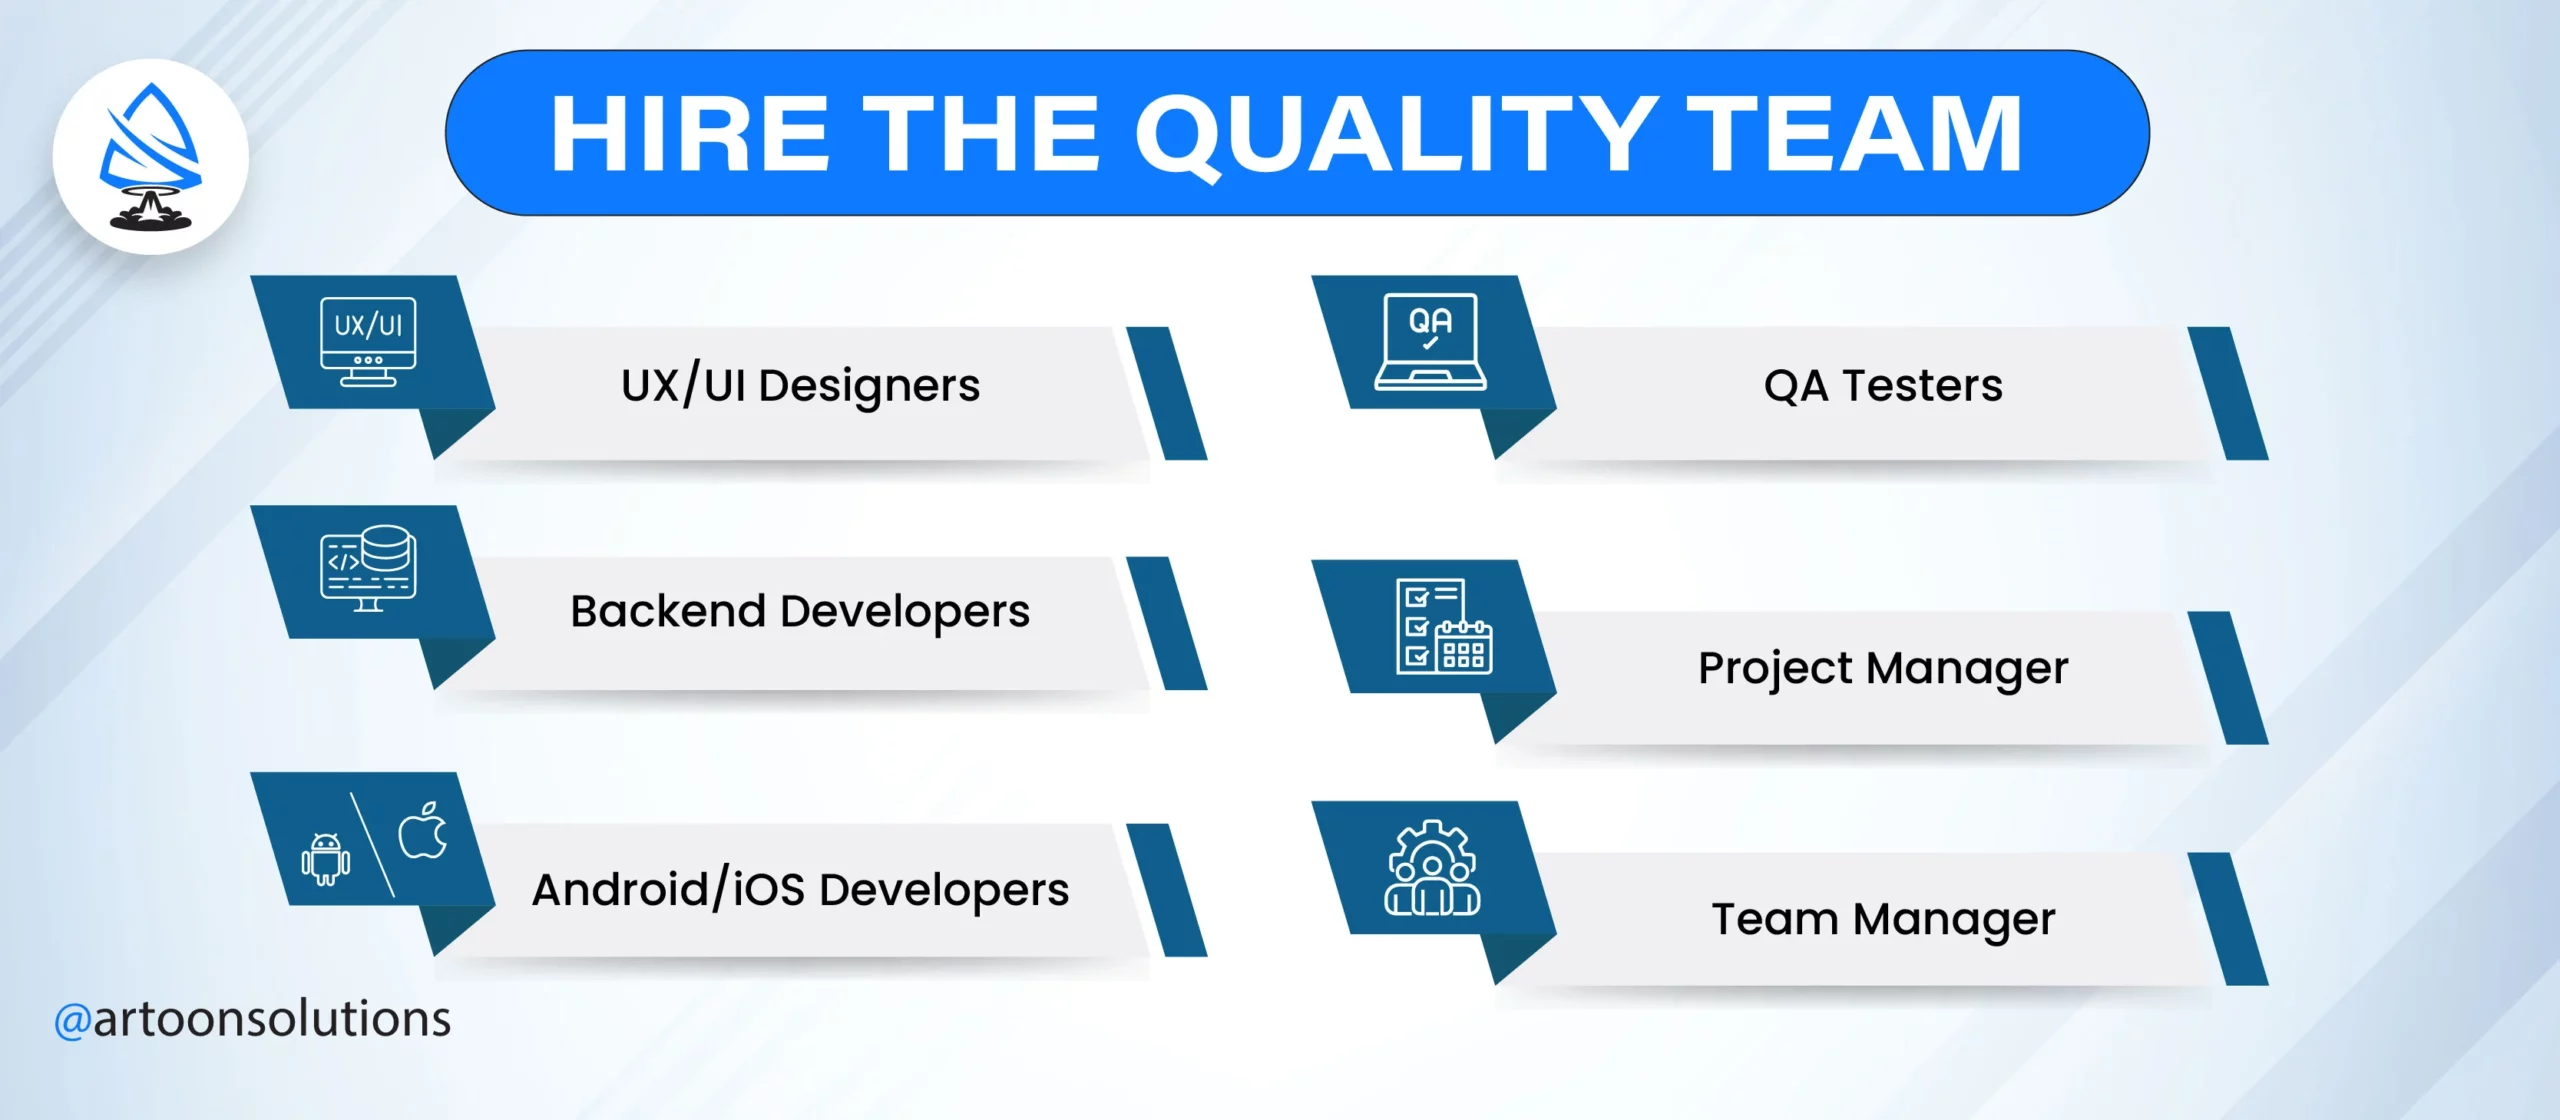 Hire the Quality Team